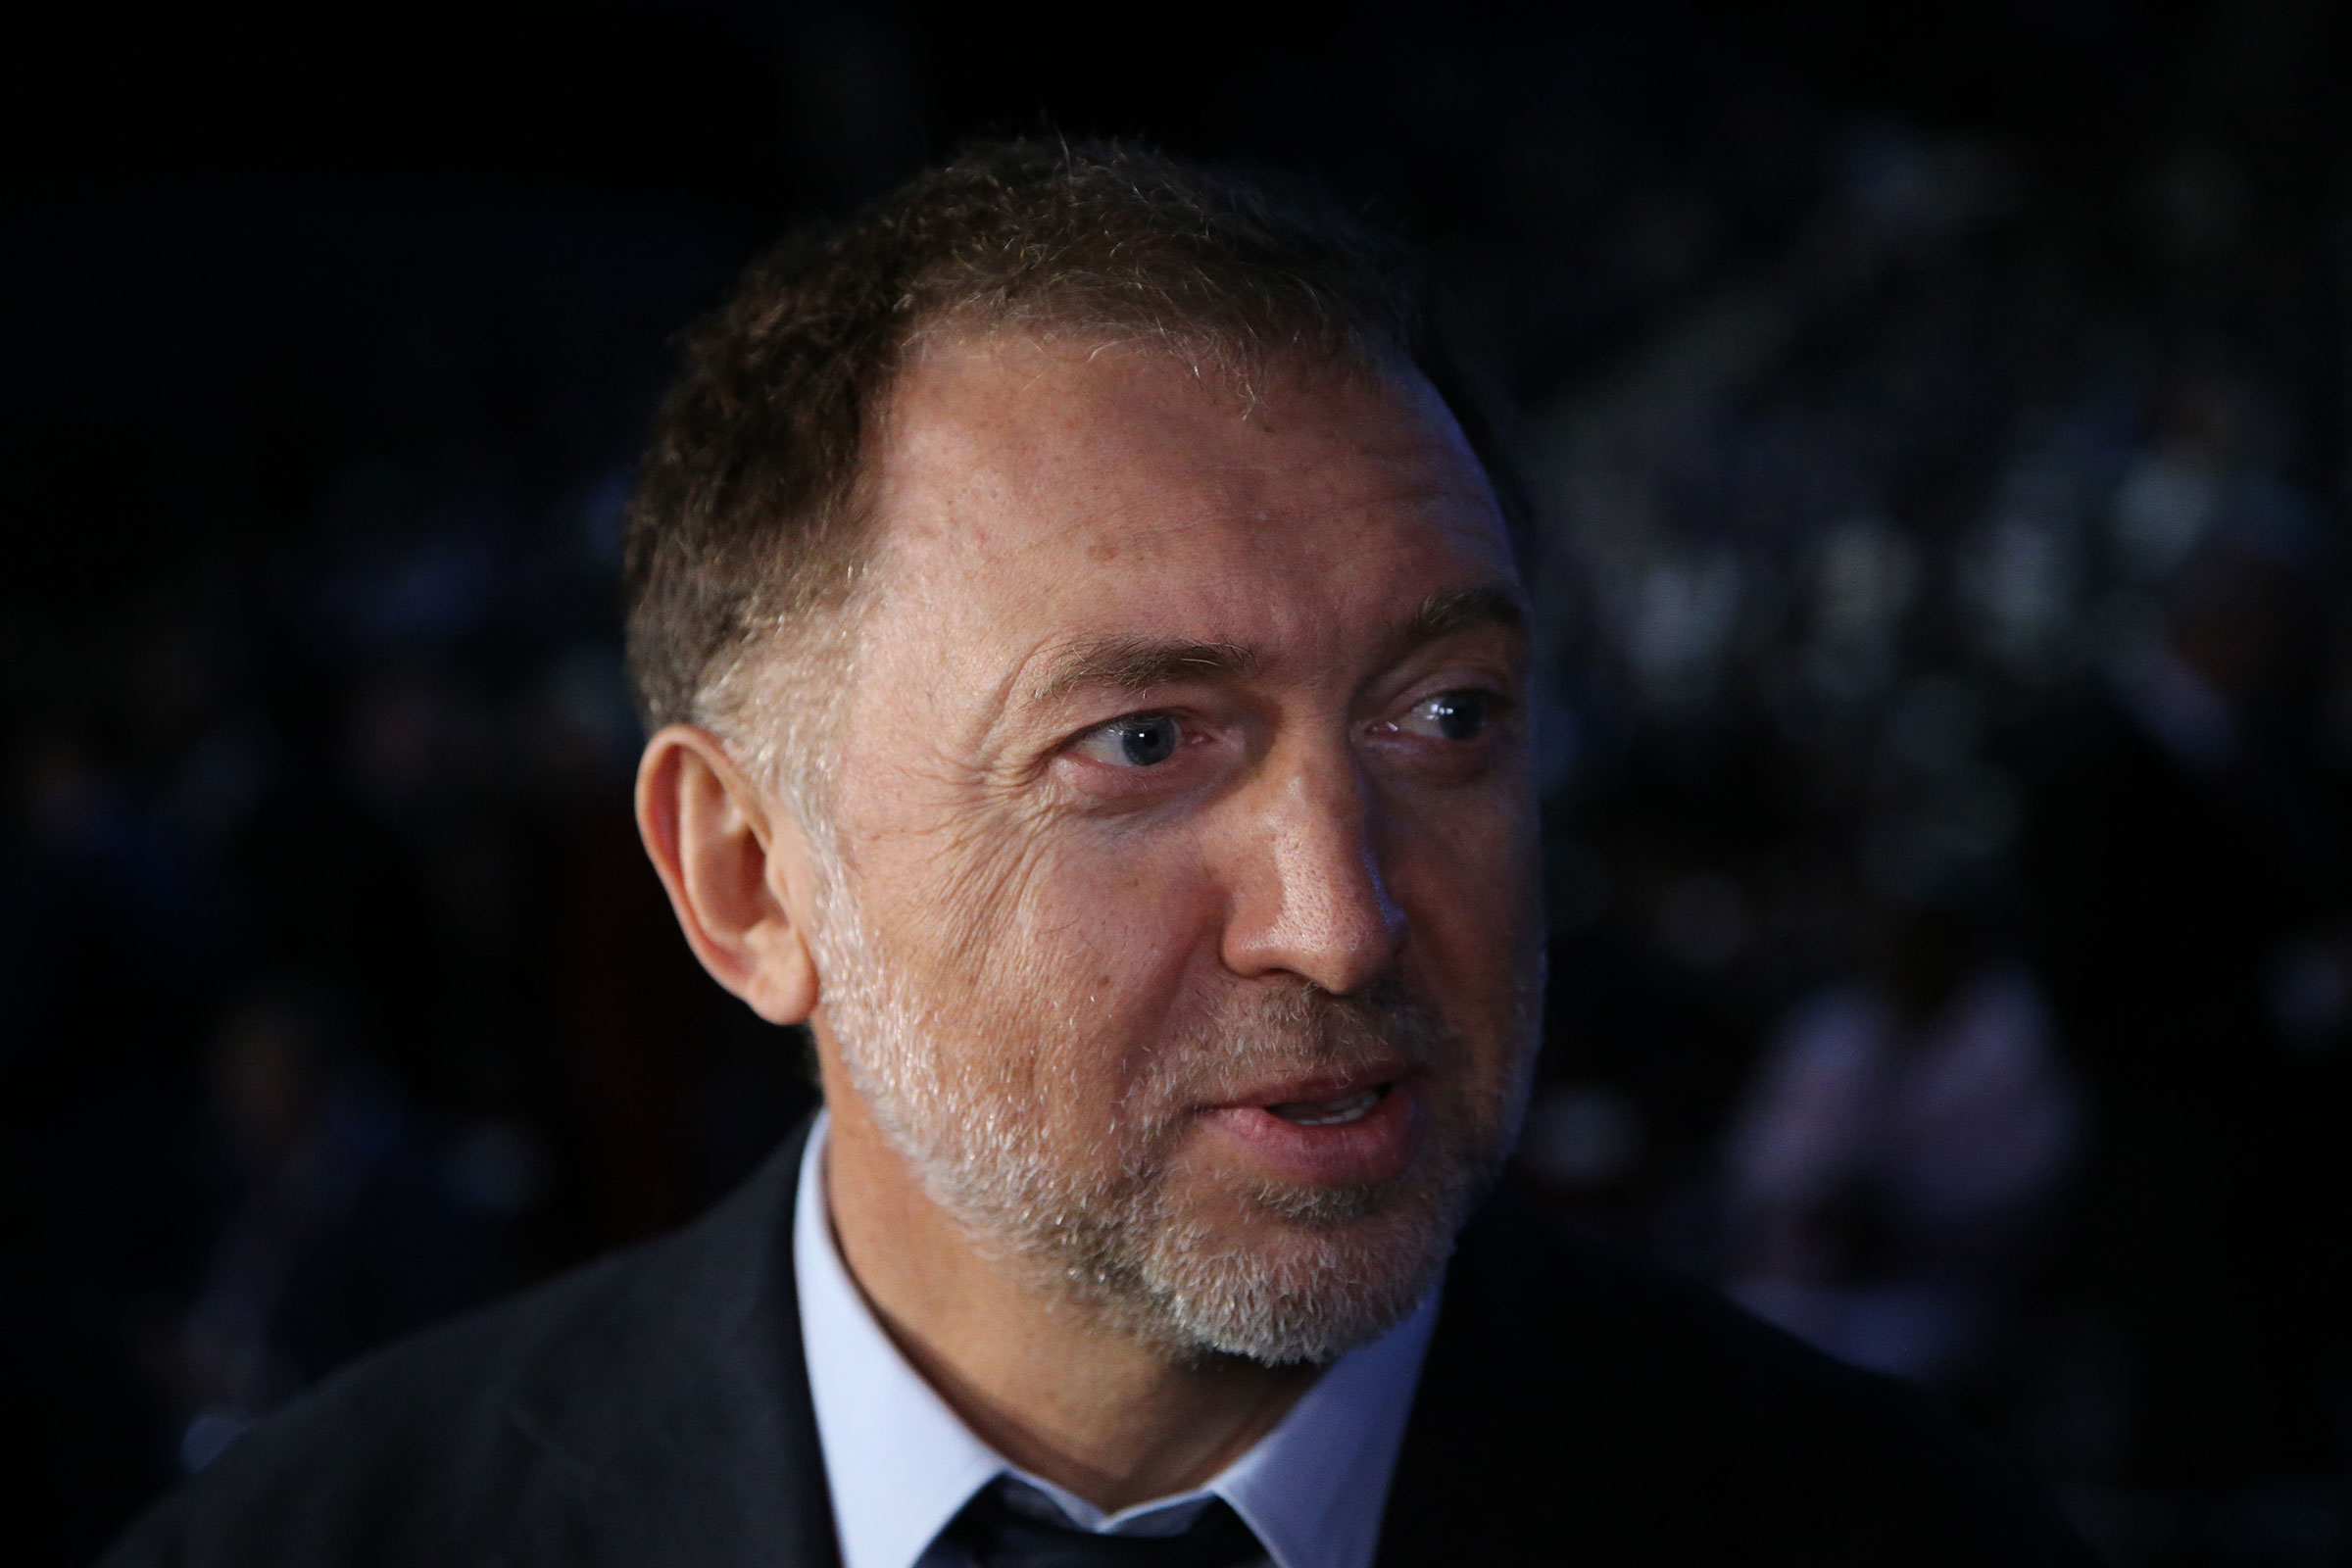 Russian billionaire and businessman Oleg Deripaska seen at the plenary session during the Saint Petersburg Economic Forum SPIEF 2022, on June 17, 2022, in Saint Petersburg, Russia. (Contributor/Getty Images)